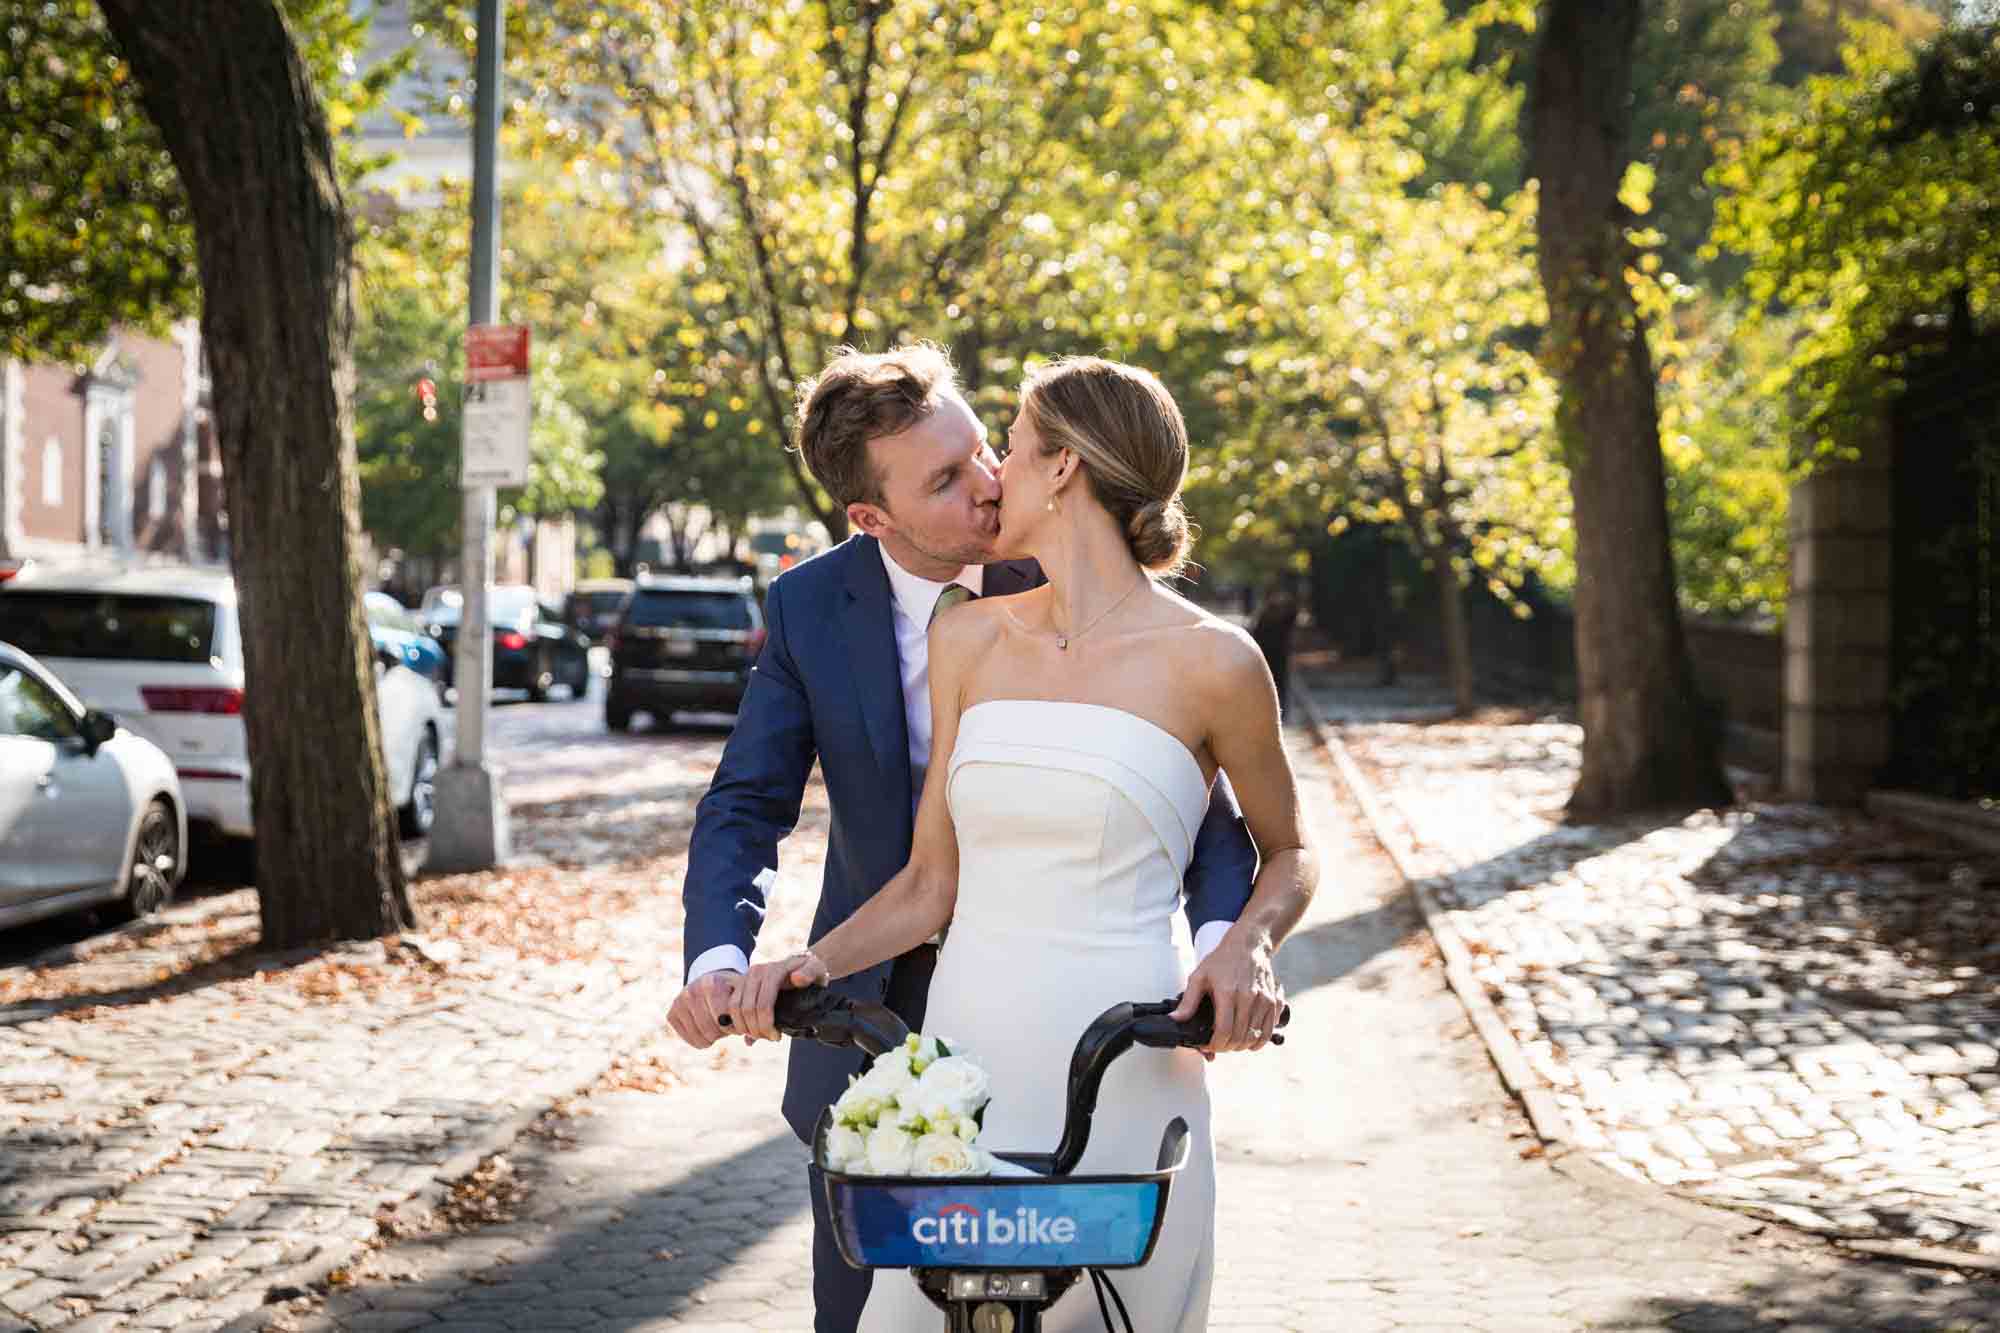 Conservatory Garden wedding photos of bride and groom kissing while on back of Citi Bike